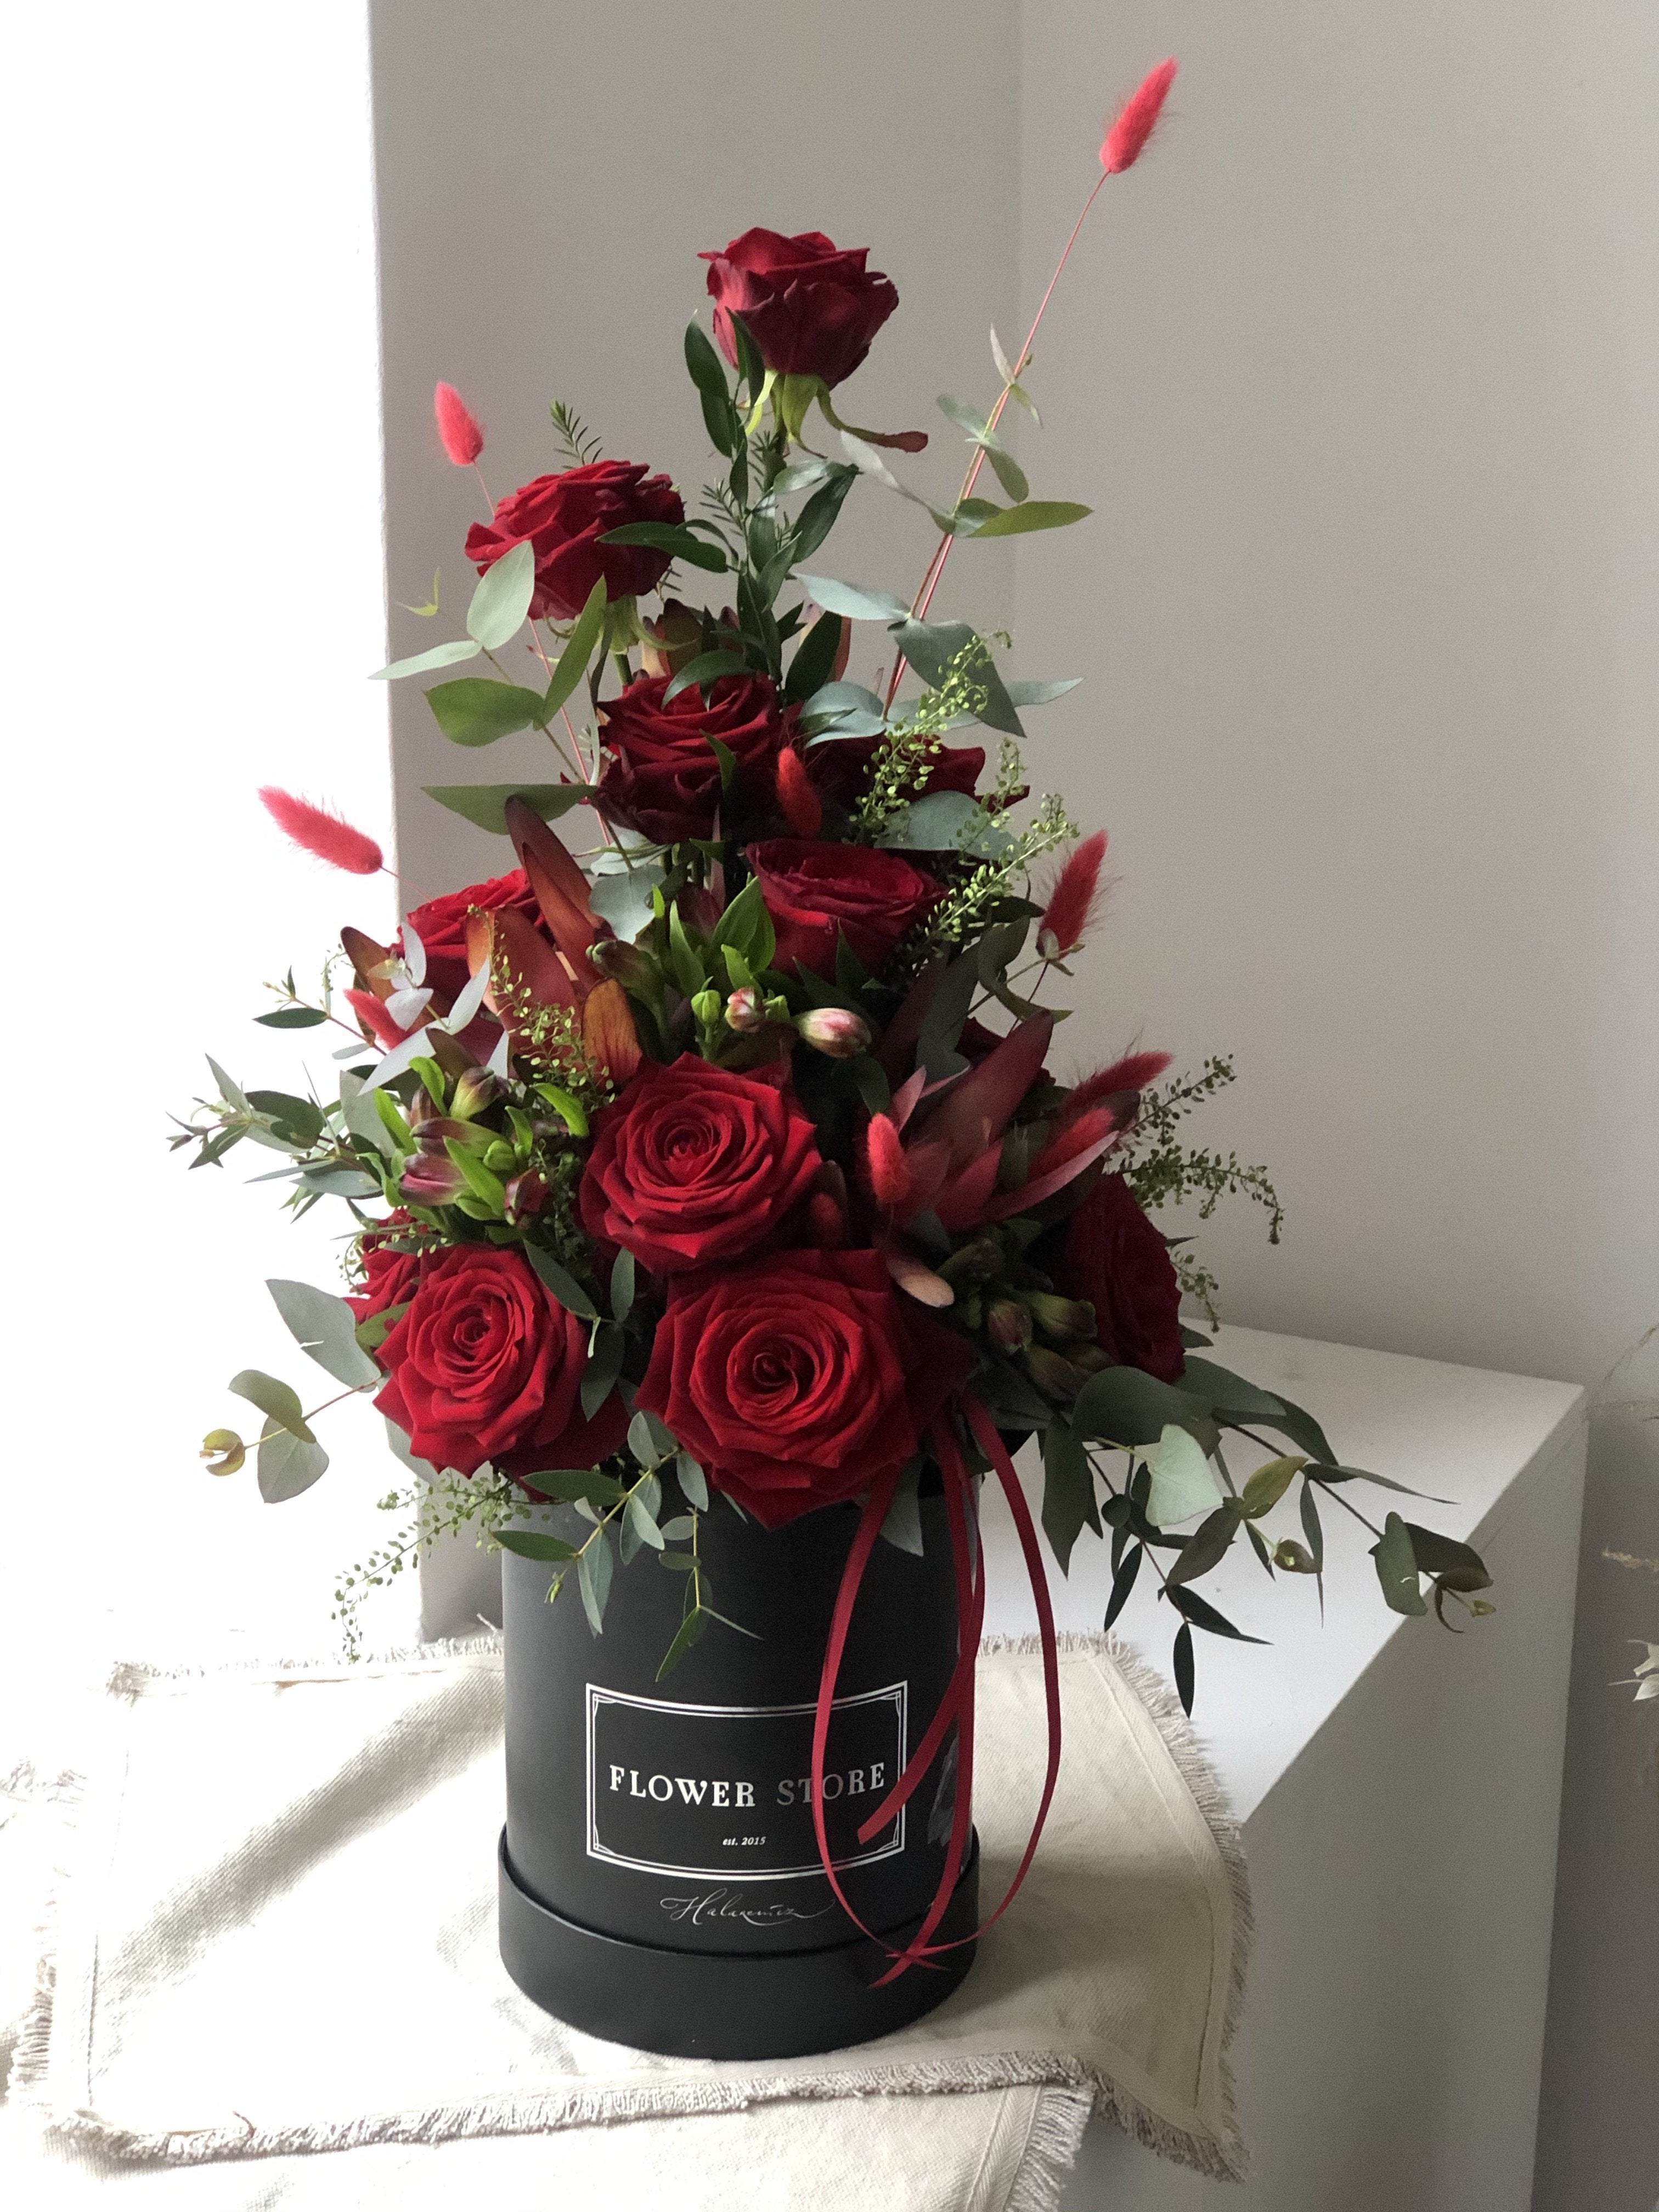 Composition with red roses - live flowers in a black box with graphics